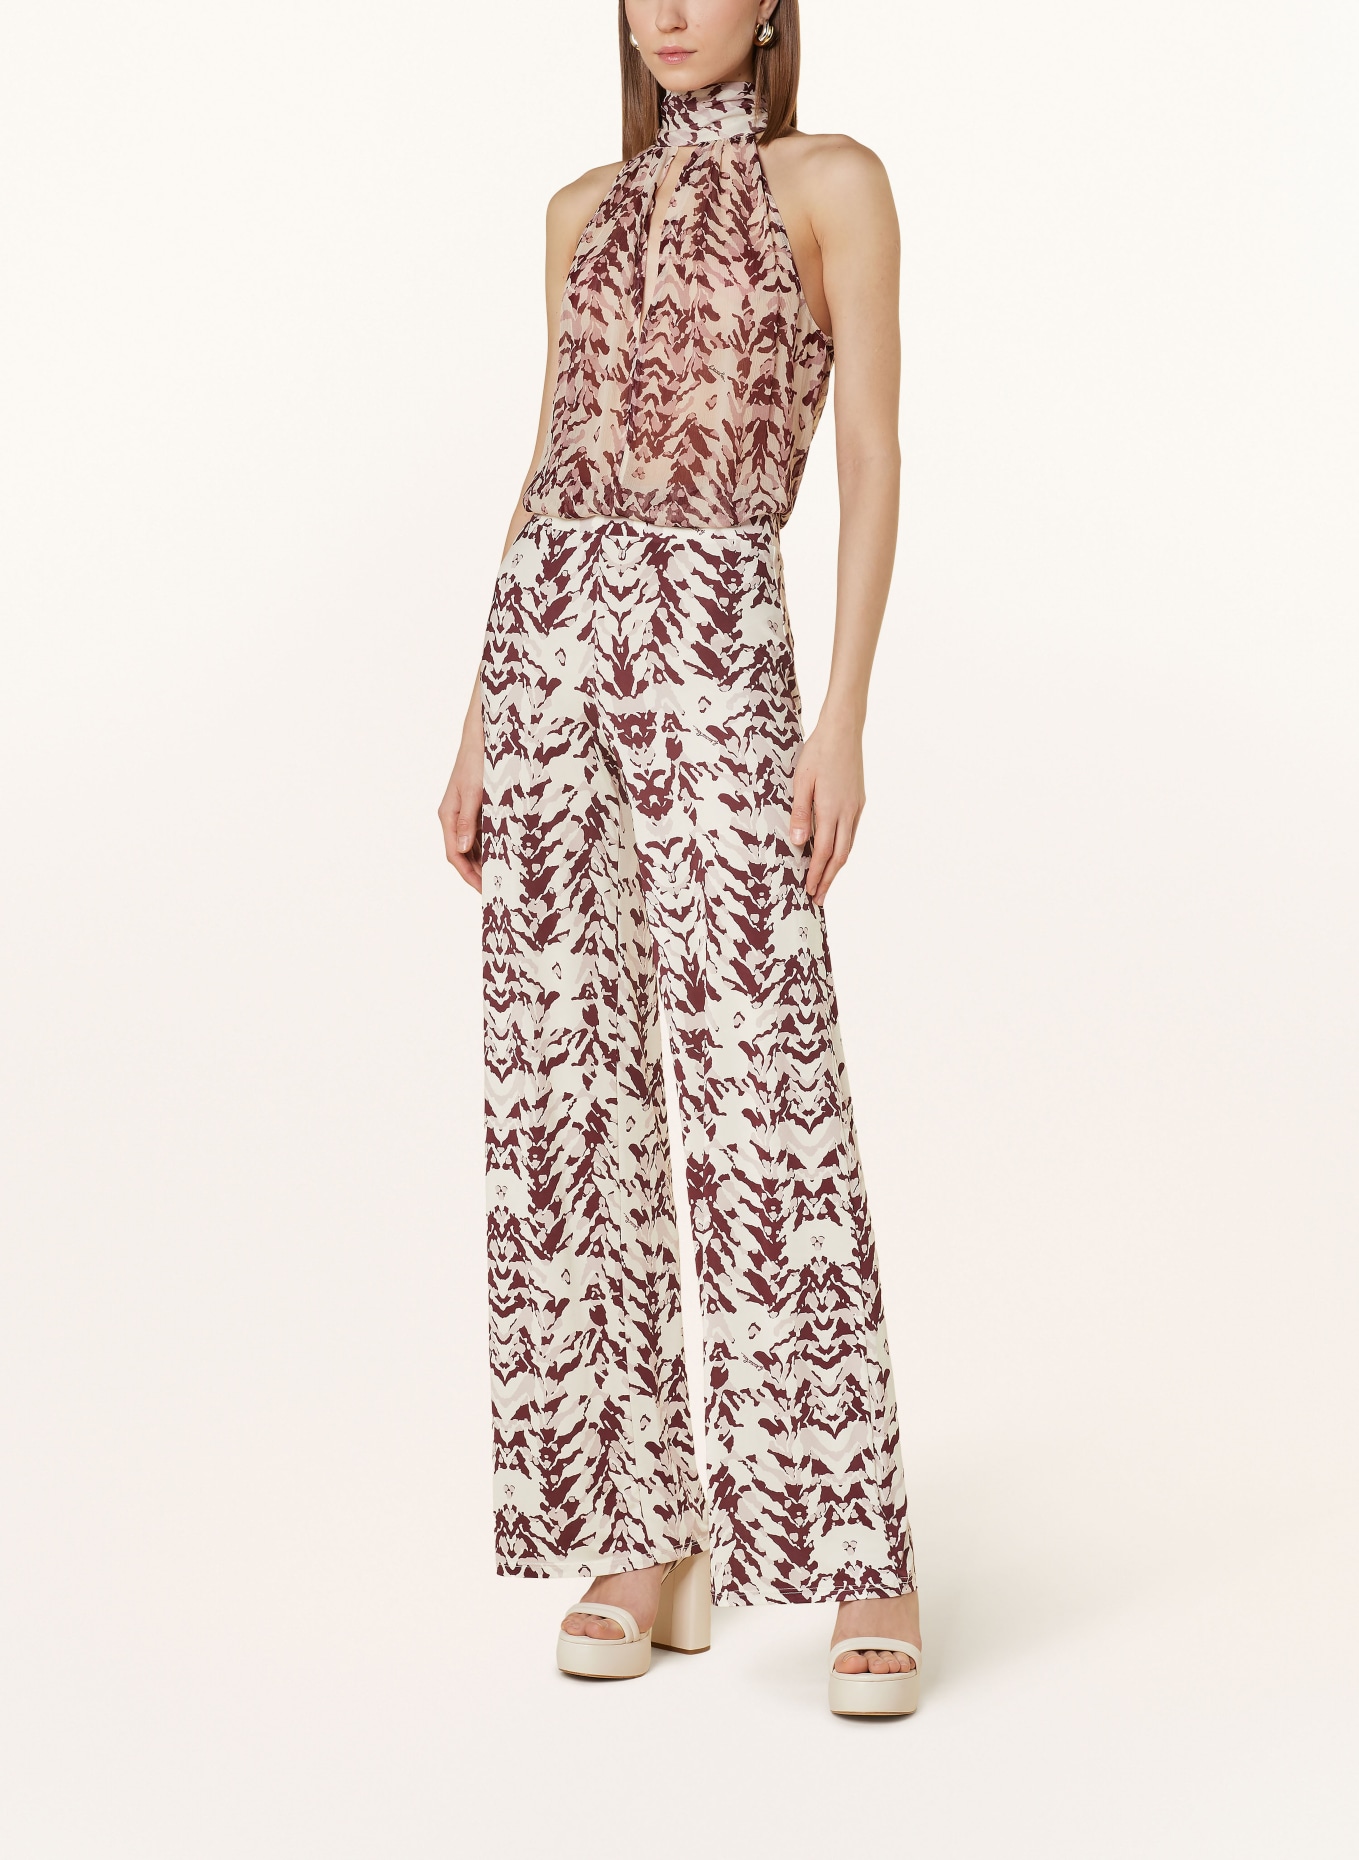 PATRIZIA PEPE Wide leg trousers made of jersey, Color: DUSKY PINK/ CREAM/ DARK RED (Image 2)